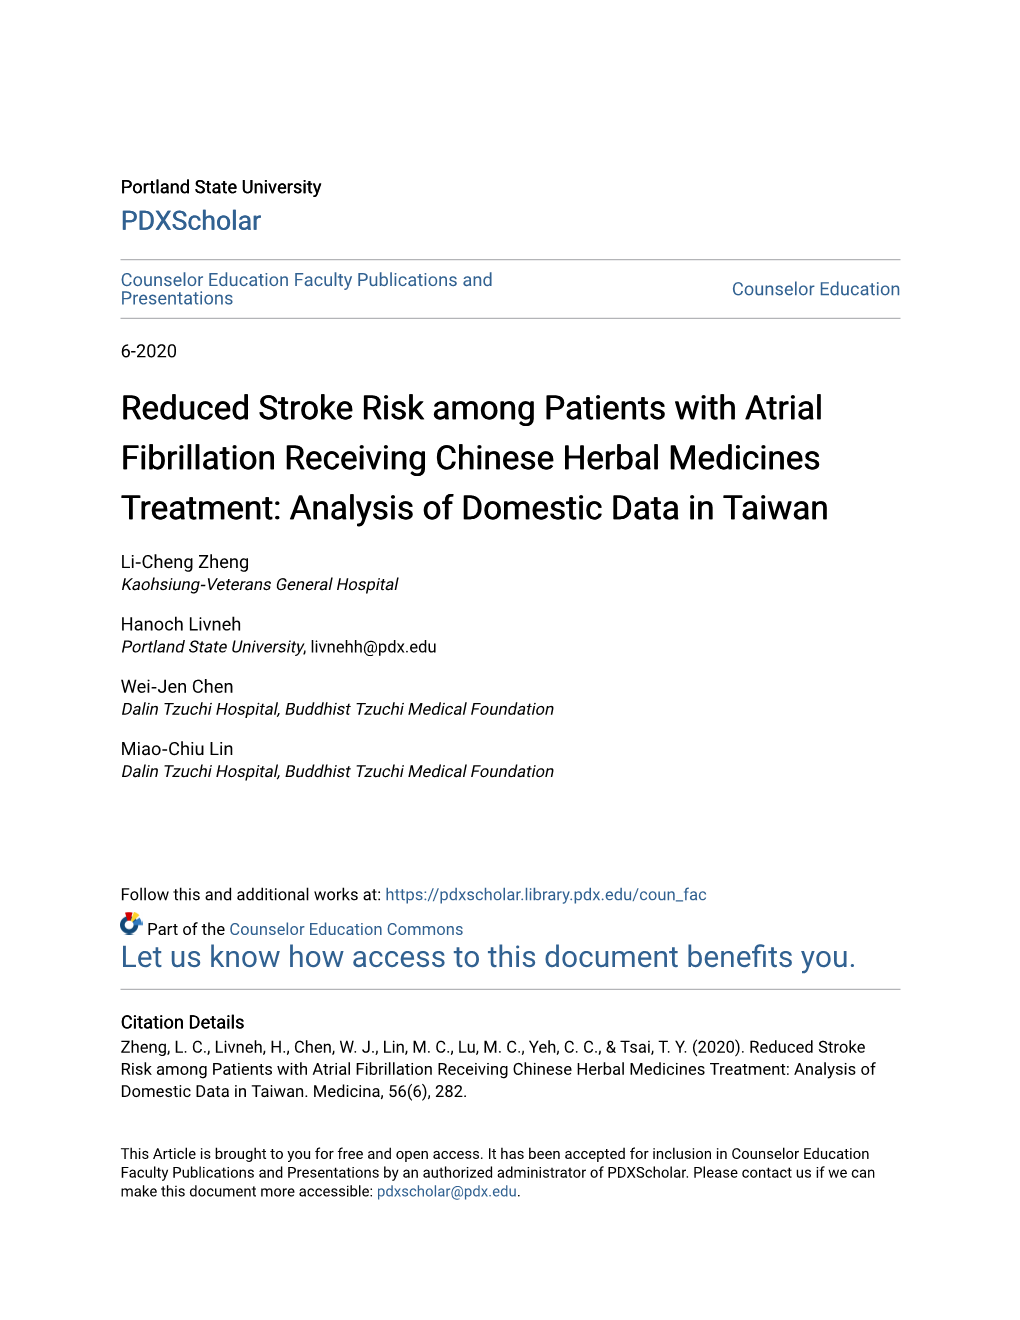 Reduced Stroke Risk Among Patients with Atrial Fibrillation Receiving Chinese Herbal Medicines Treatment: Analysis of Domestic Data in Taiwan